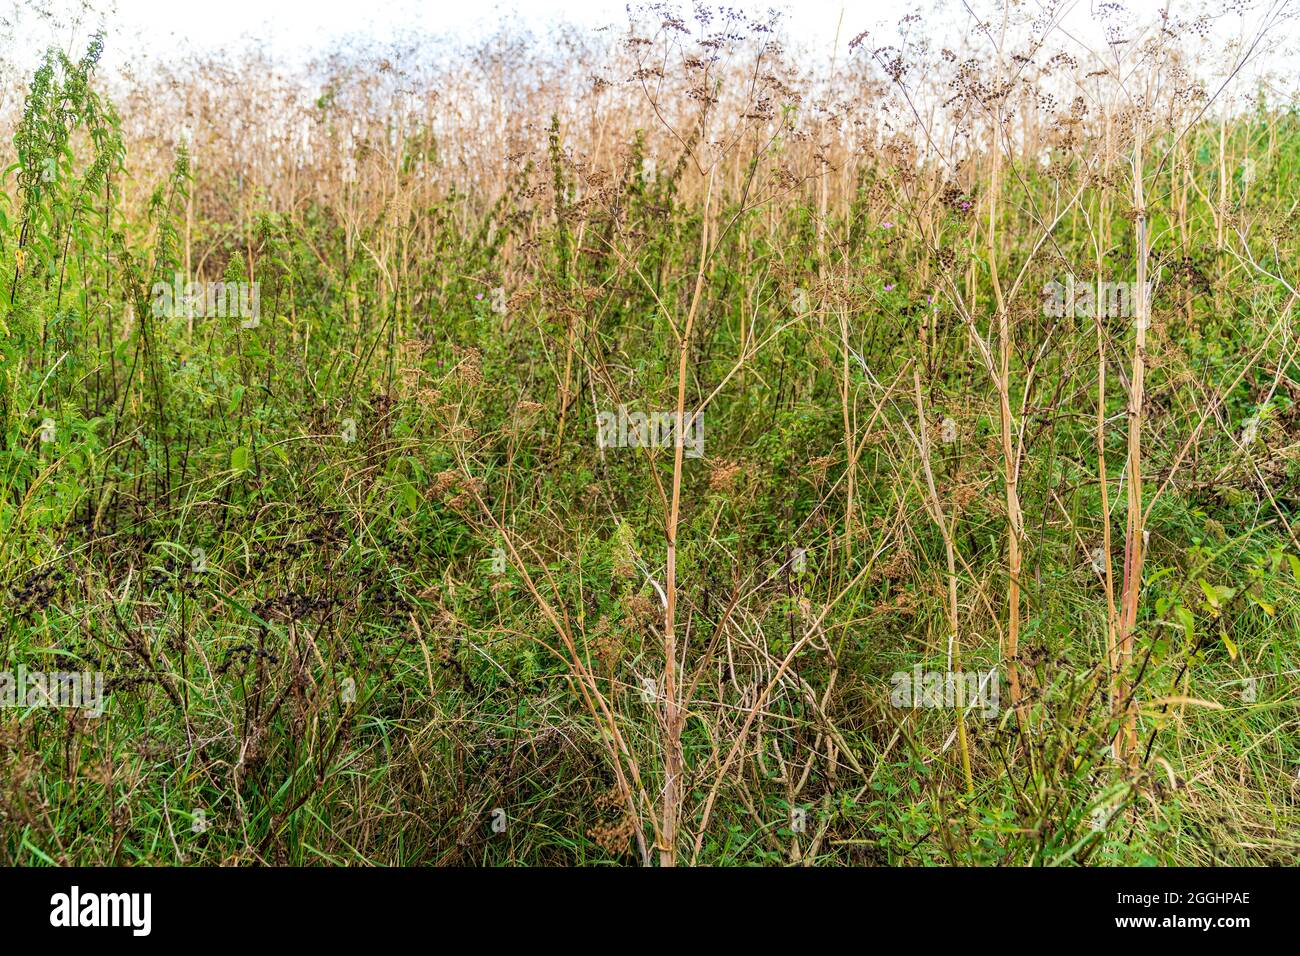 Mass of tall weeds, thistles and Hogweed growing on grass bank. Wide angle close up straight into the mass with focus on central hogweed stem. Stock Photo